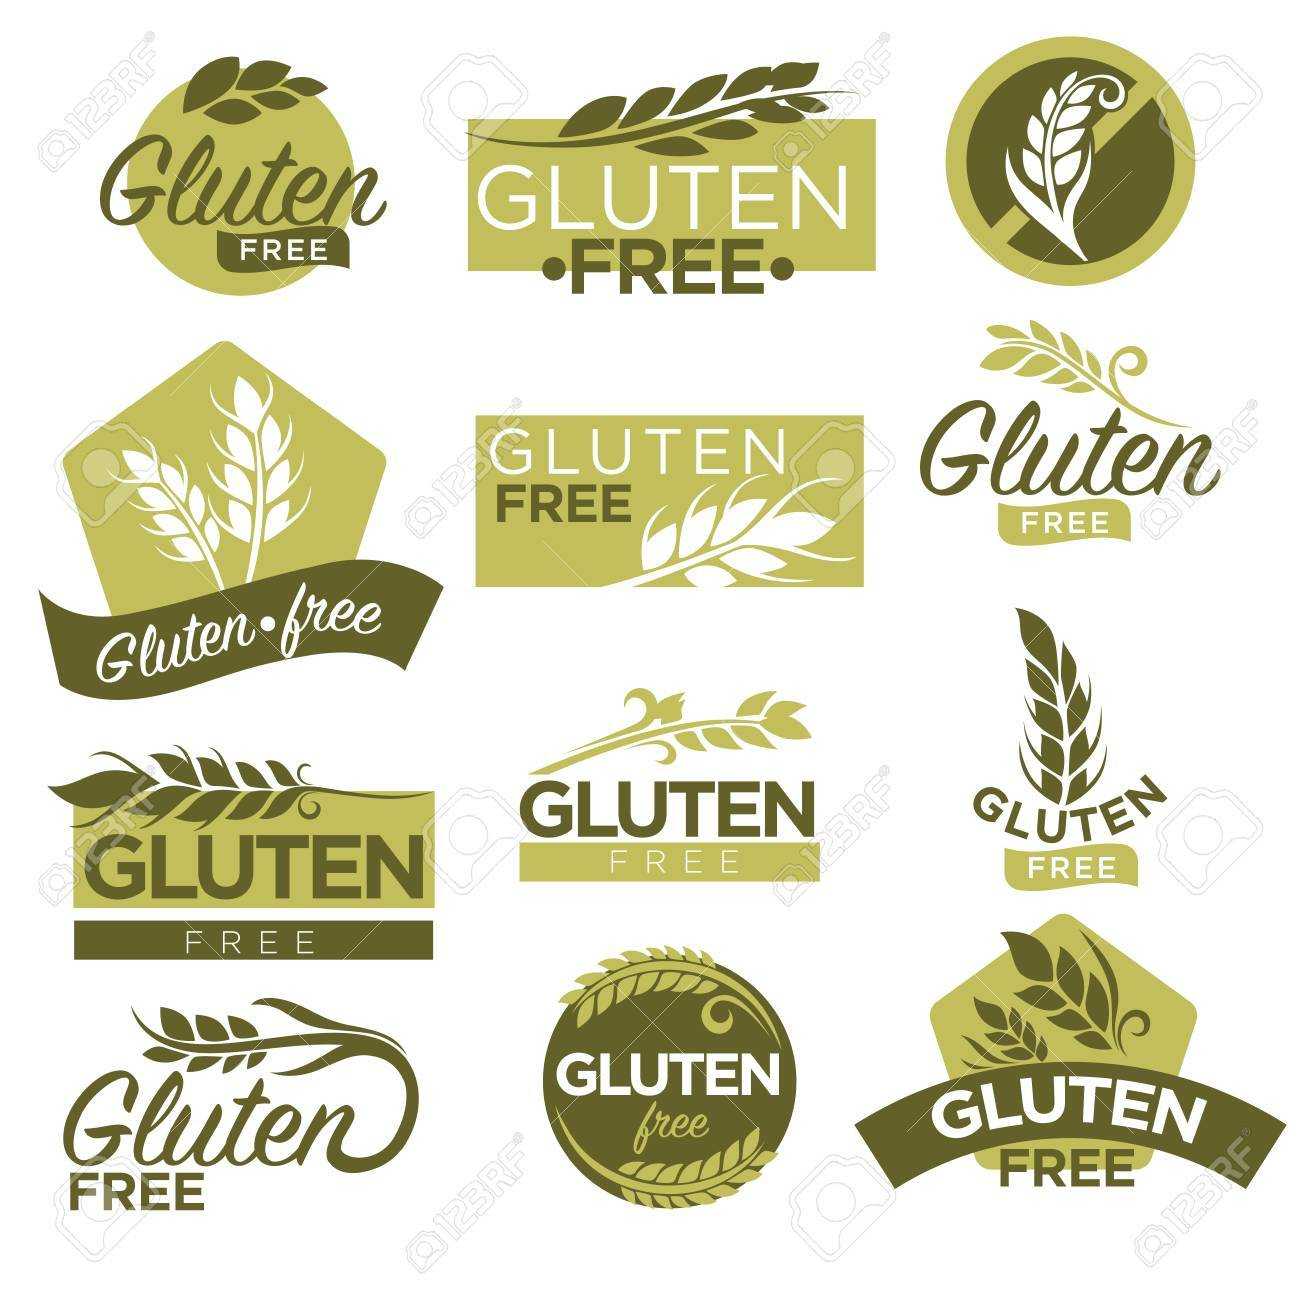 Gluten Free Vector Templates. Isolated Set Of Icons For Healthy.. Within Food Product Labels Template